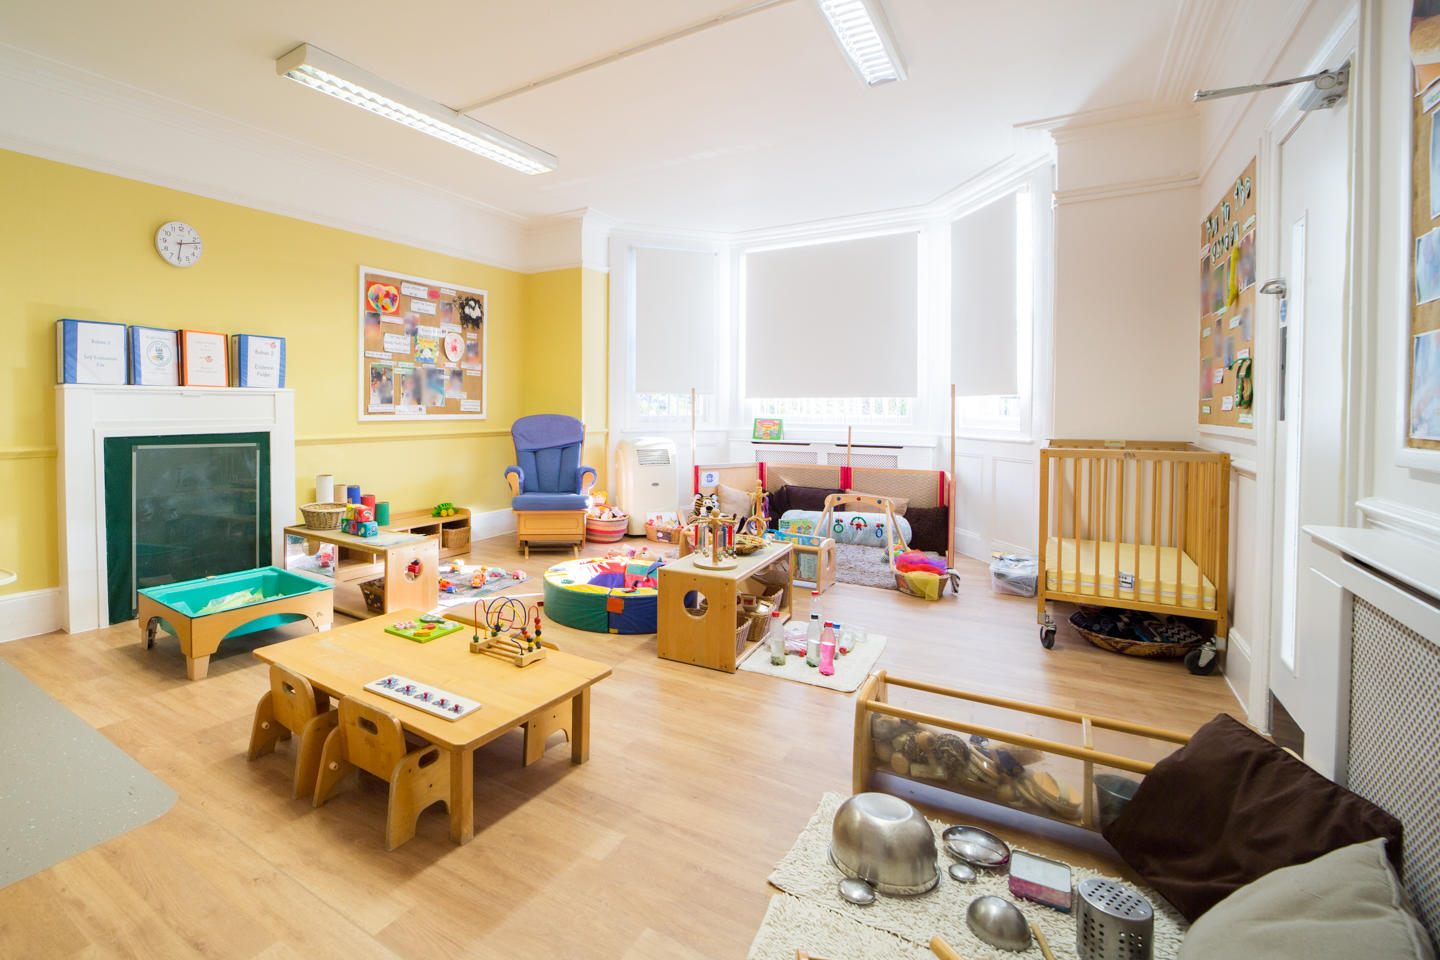 Images Bright Horizons Harpenden Luton Road Day Nursery and Preschool